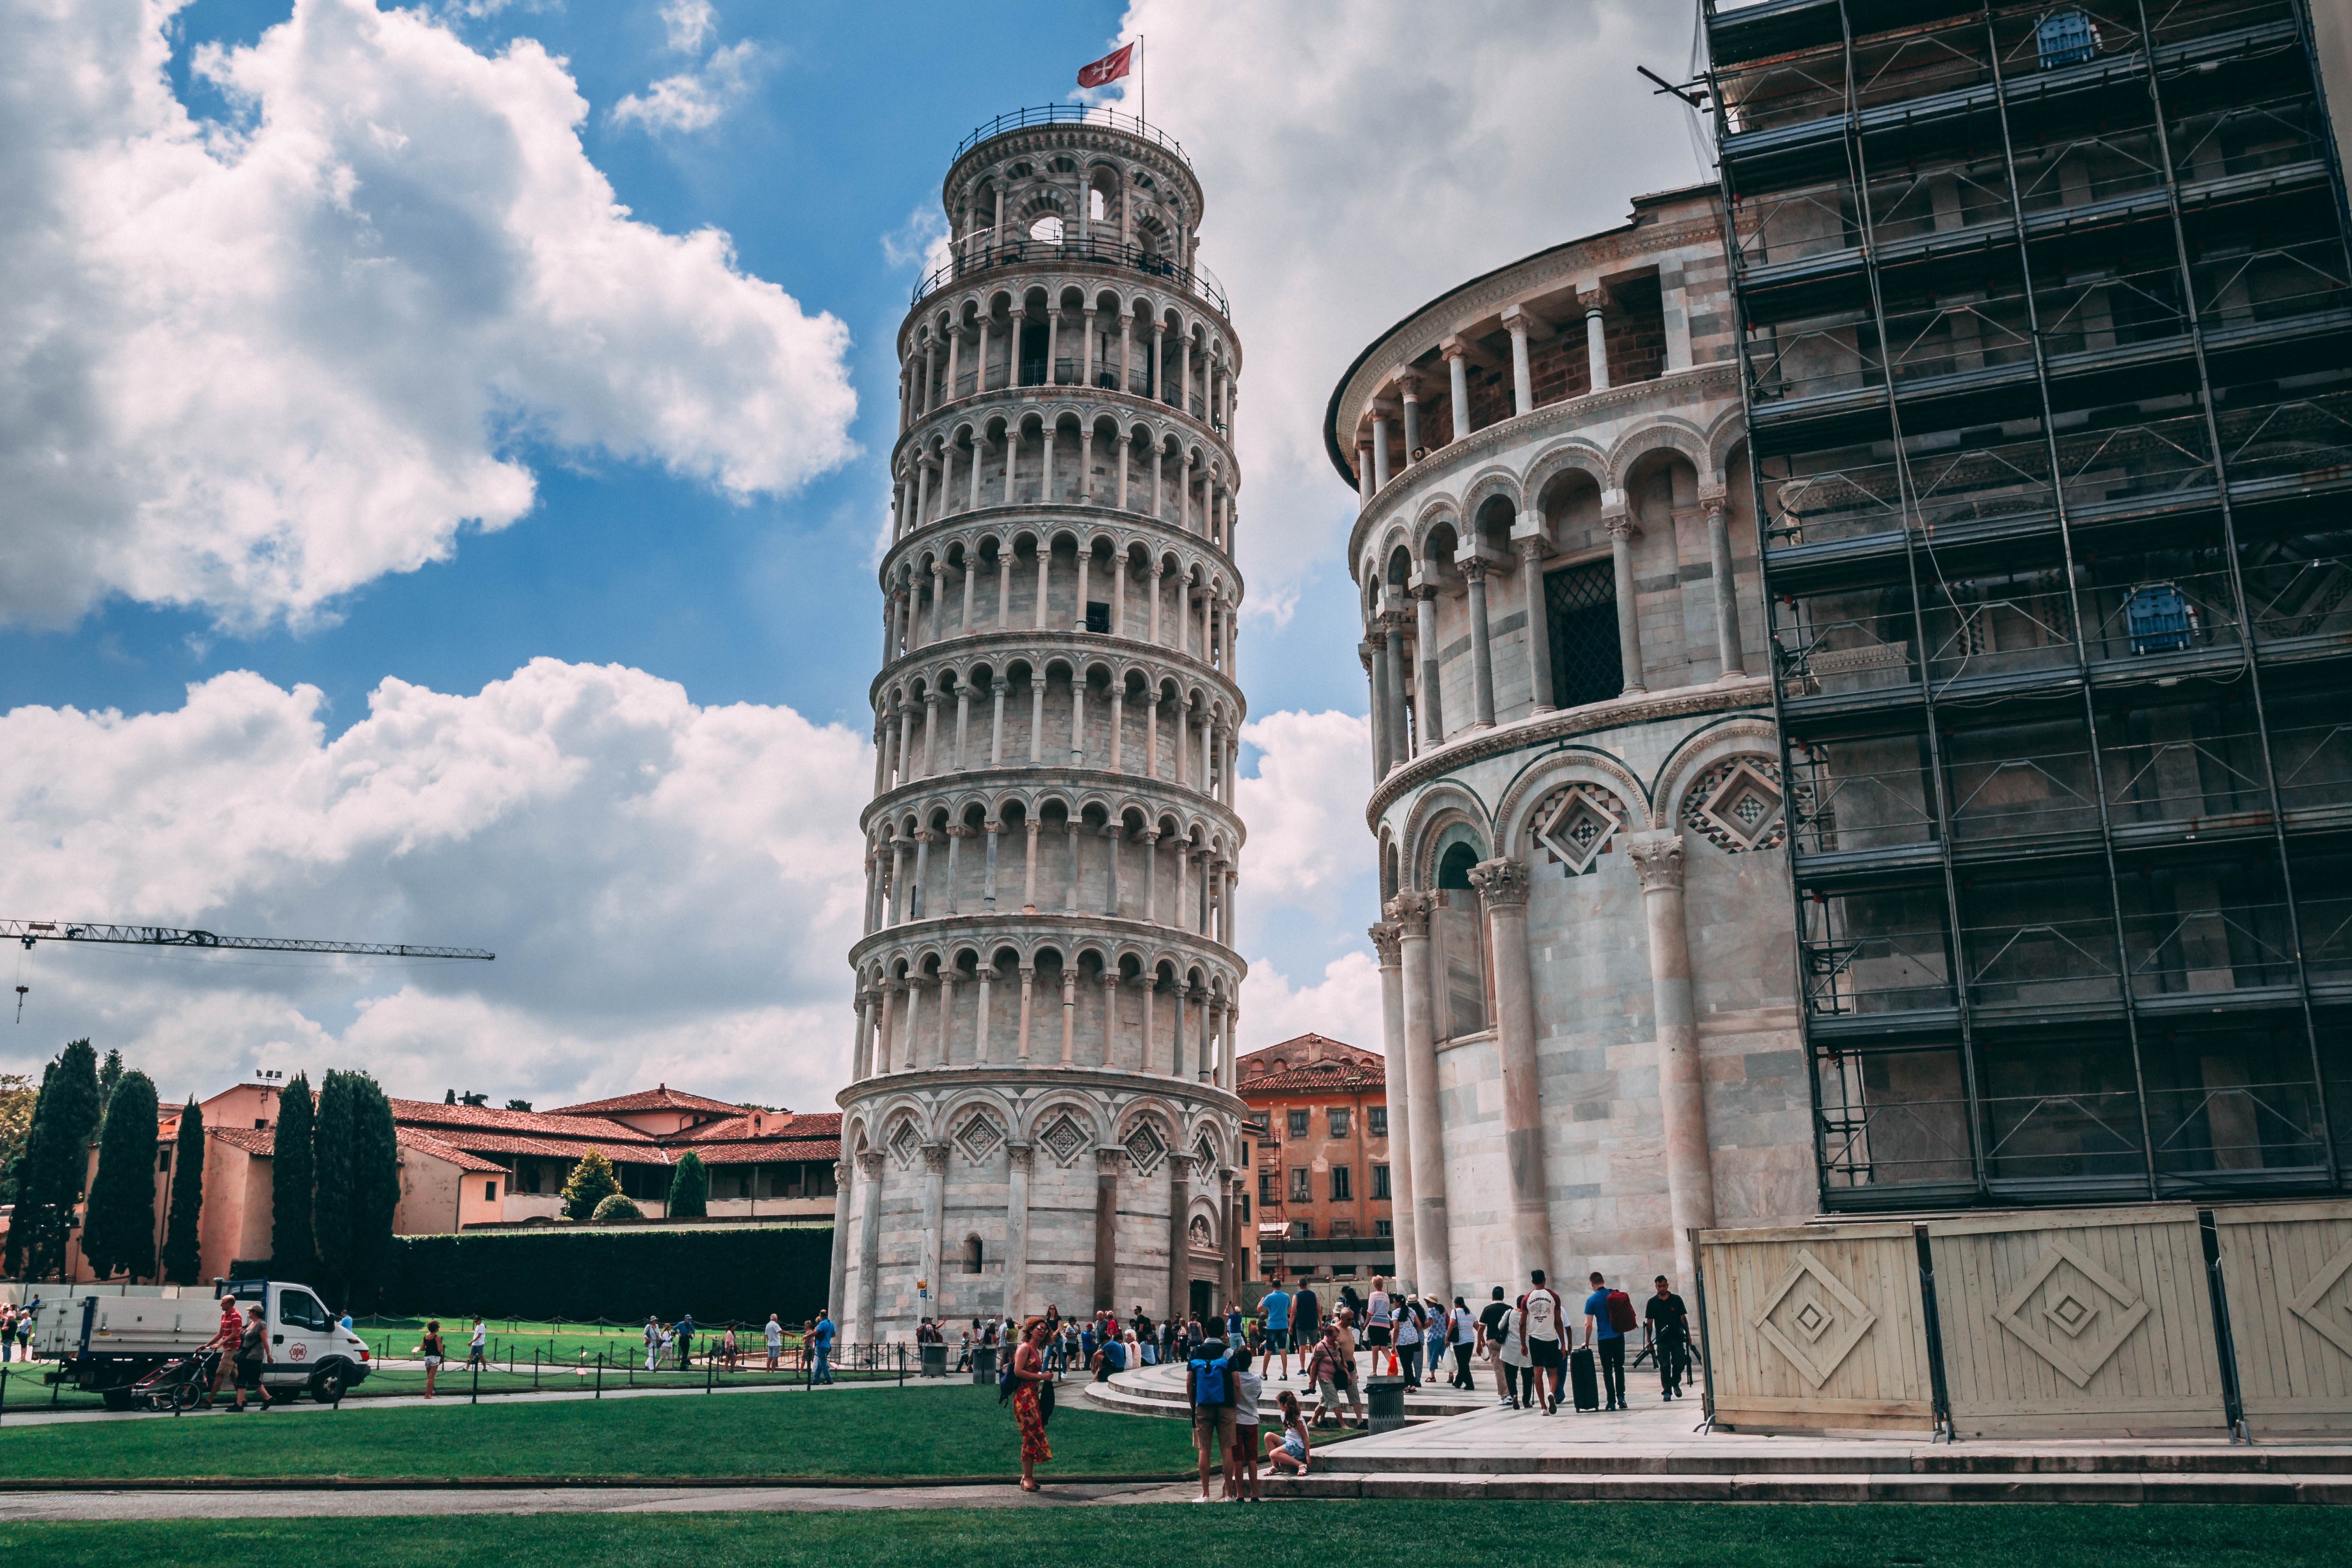 Leaning Tower Of Pisa Wallpapers